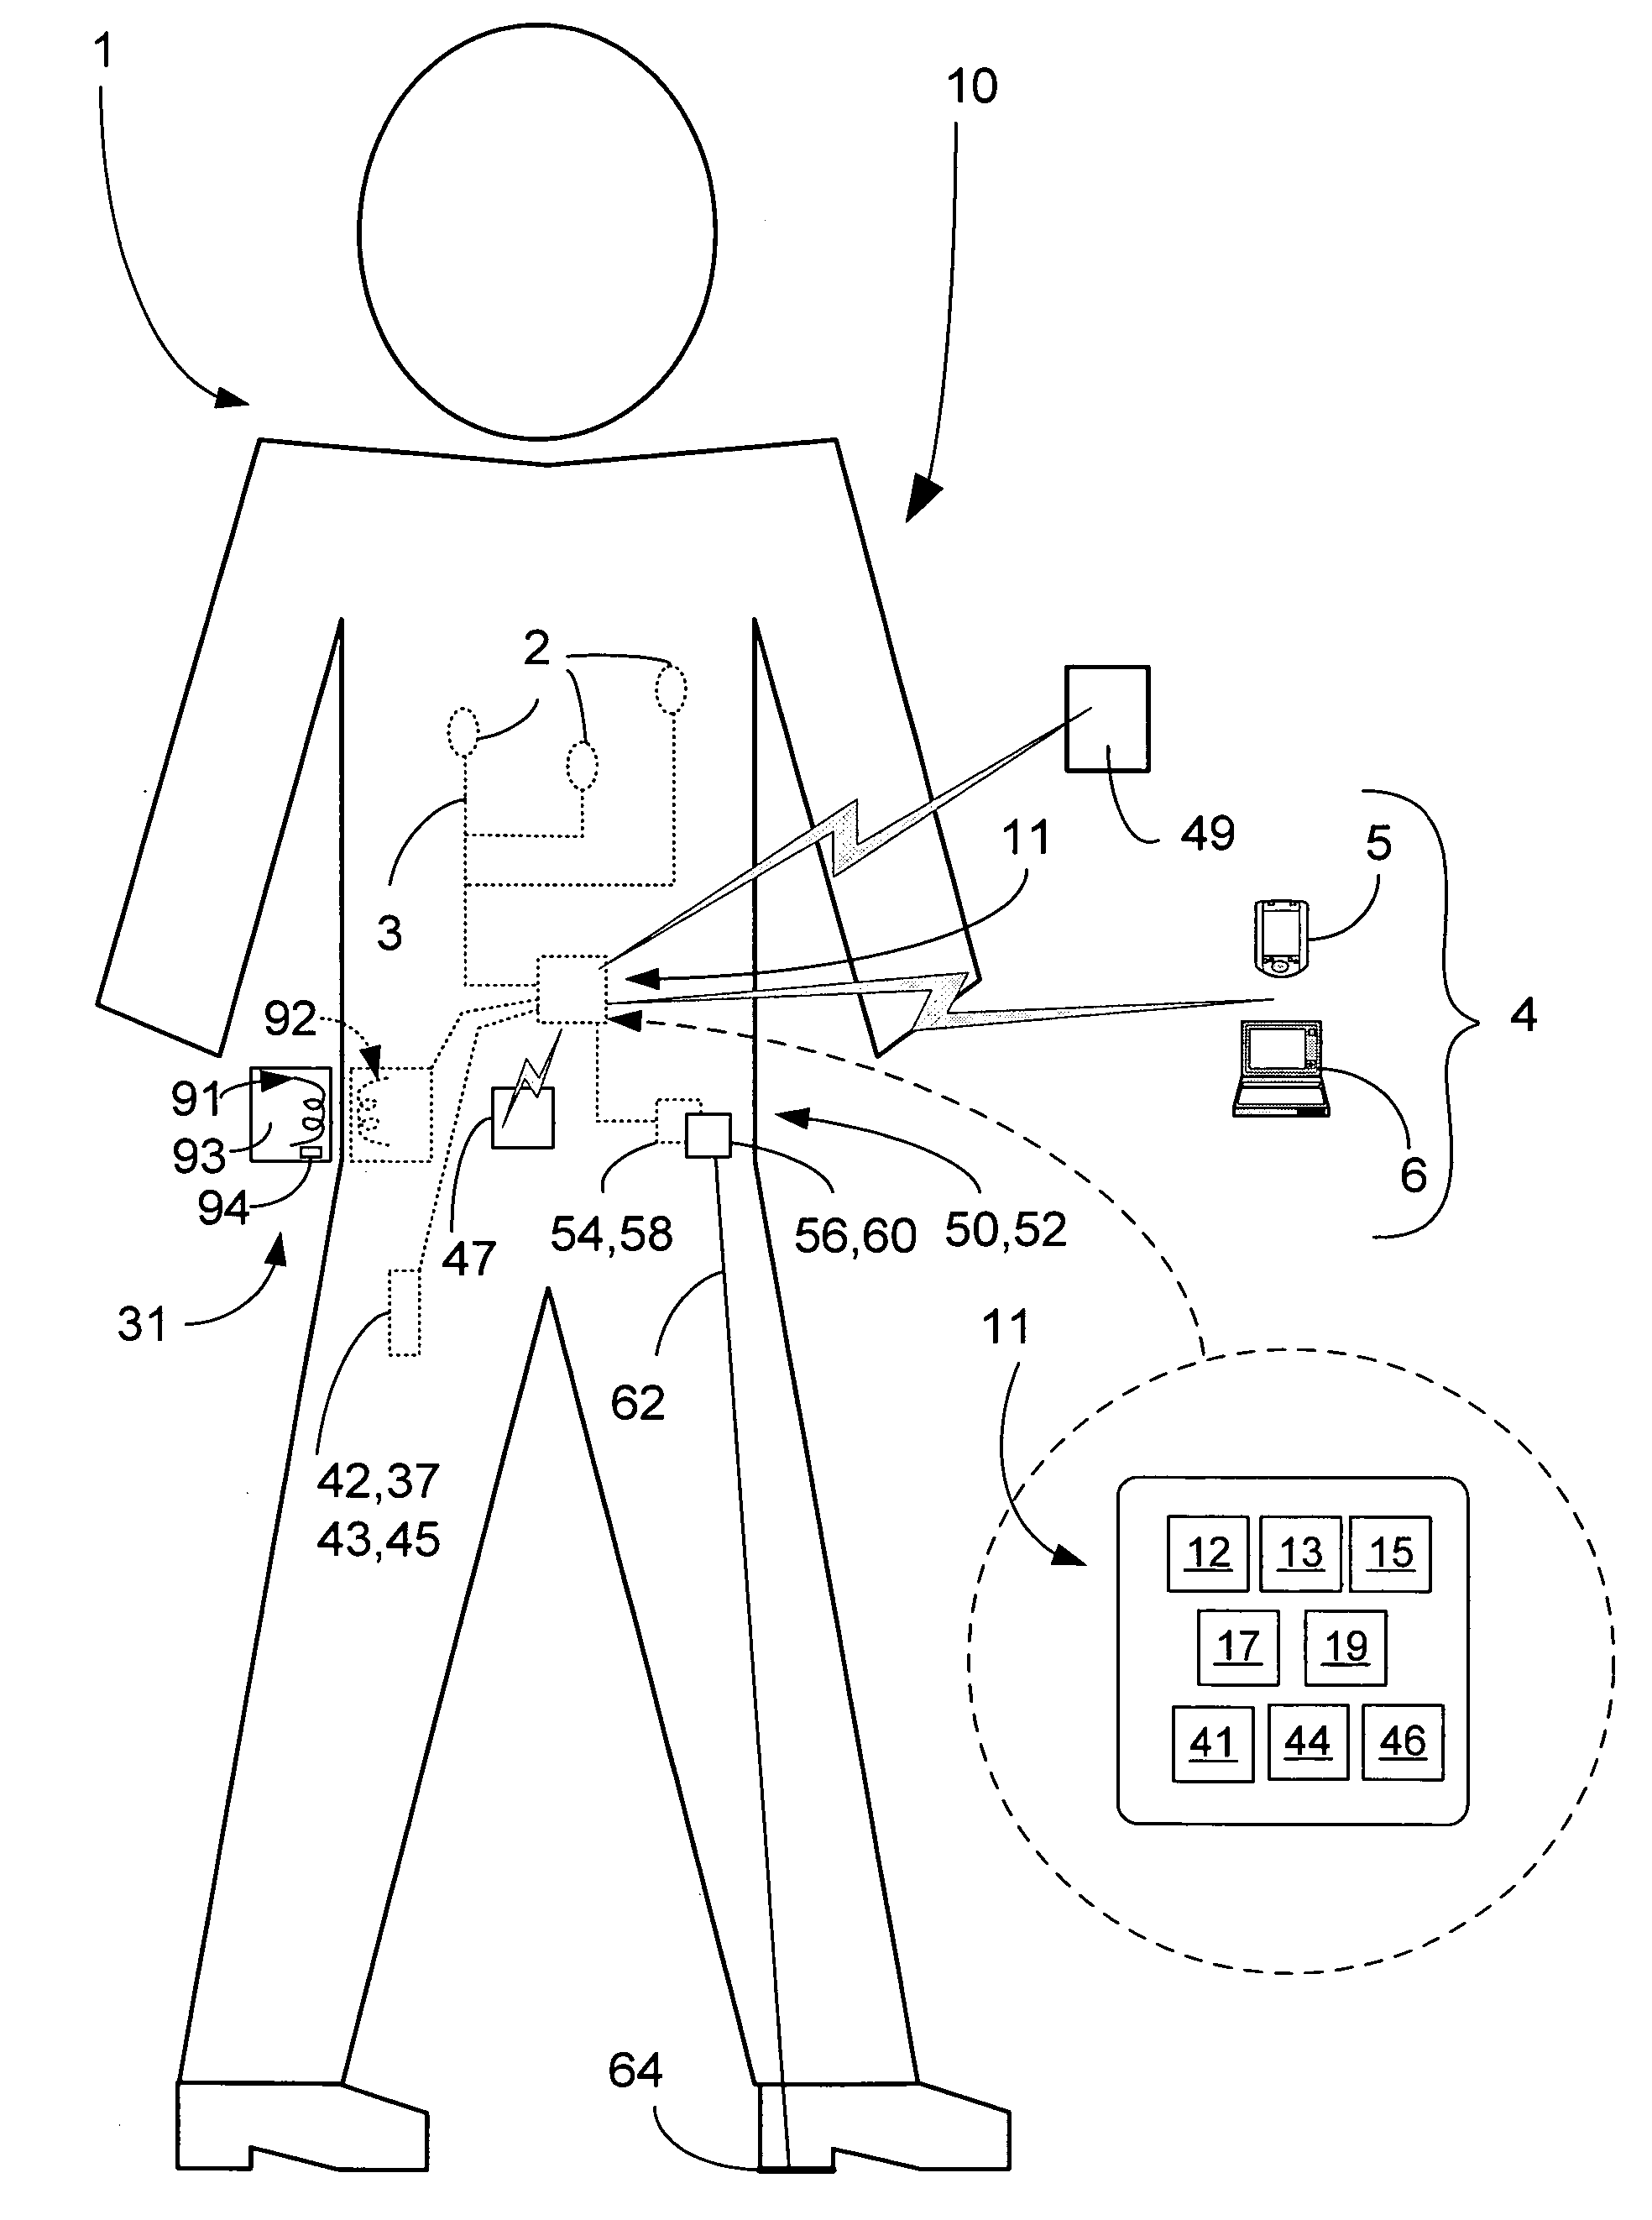 Hard disk drive medical monitor with electrical grounding system